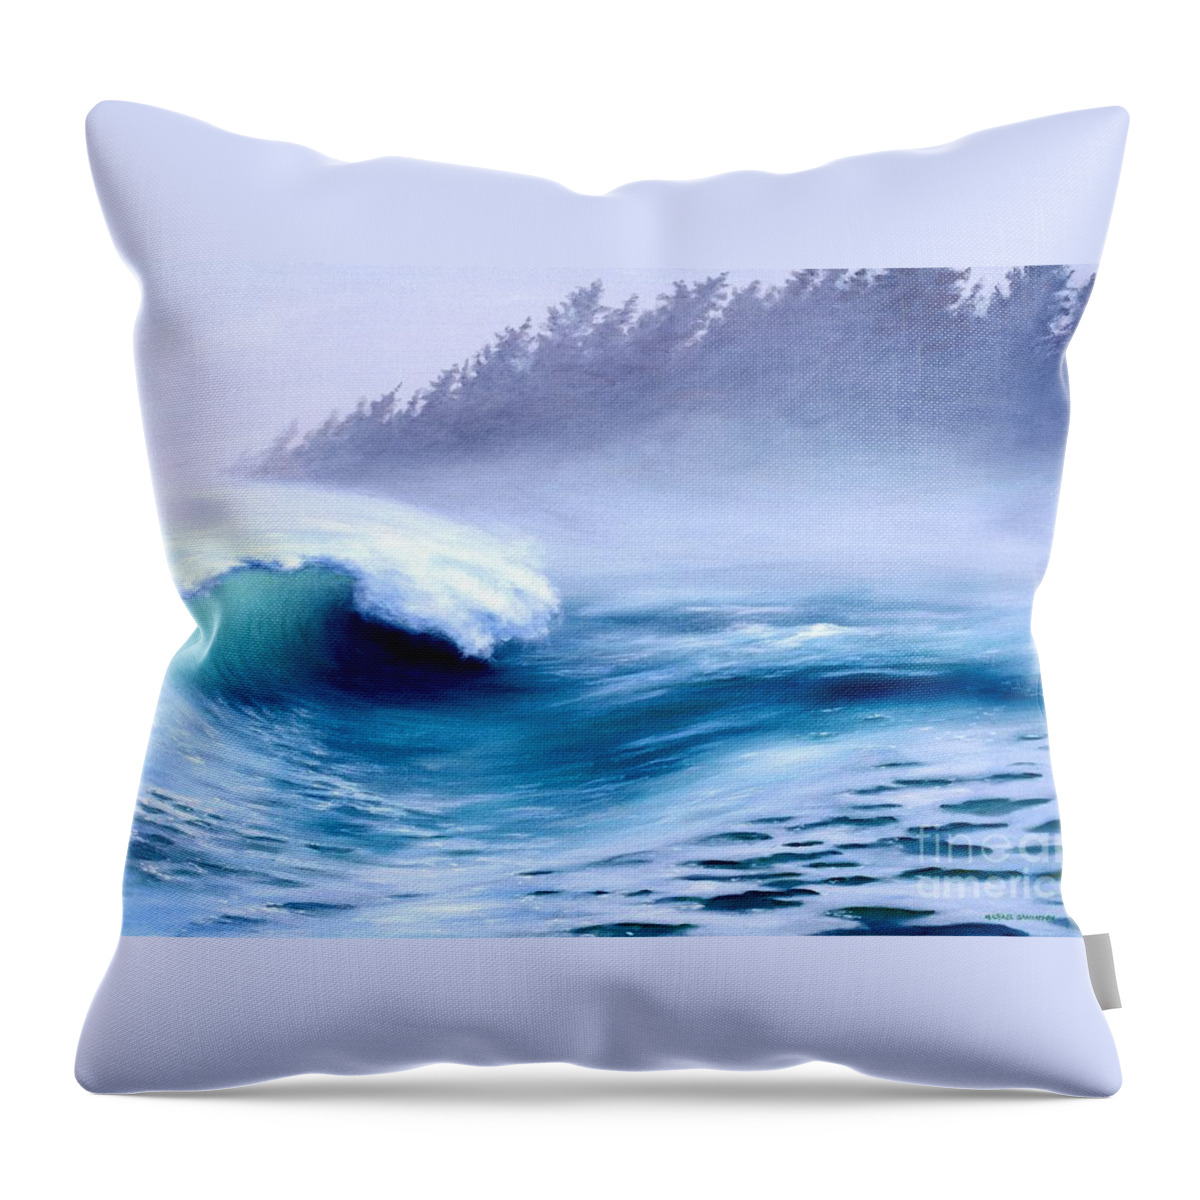 Ocean Waves Throw Pillow featuring the painting Pacific Power by Michael Swanson